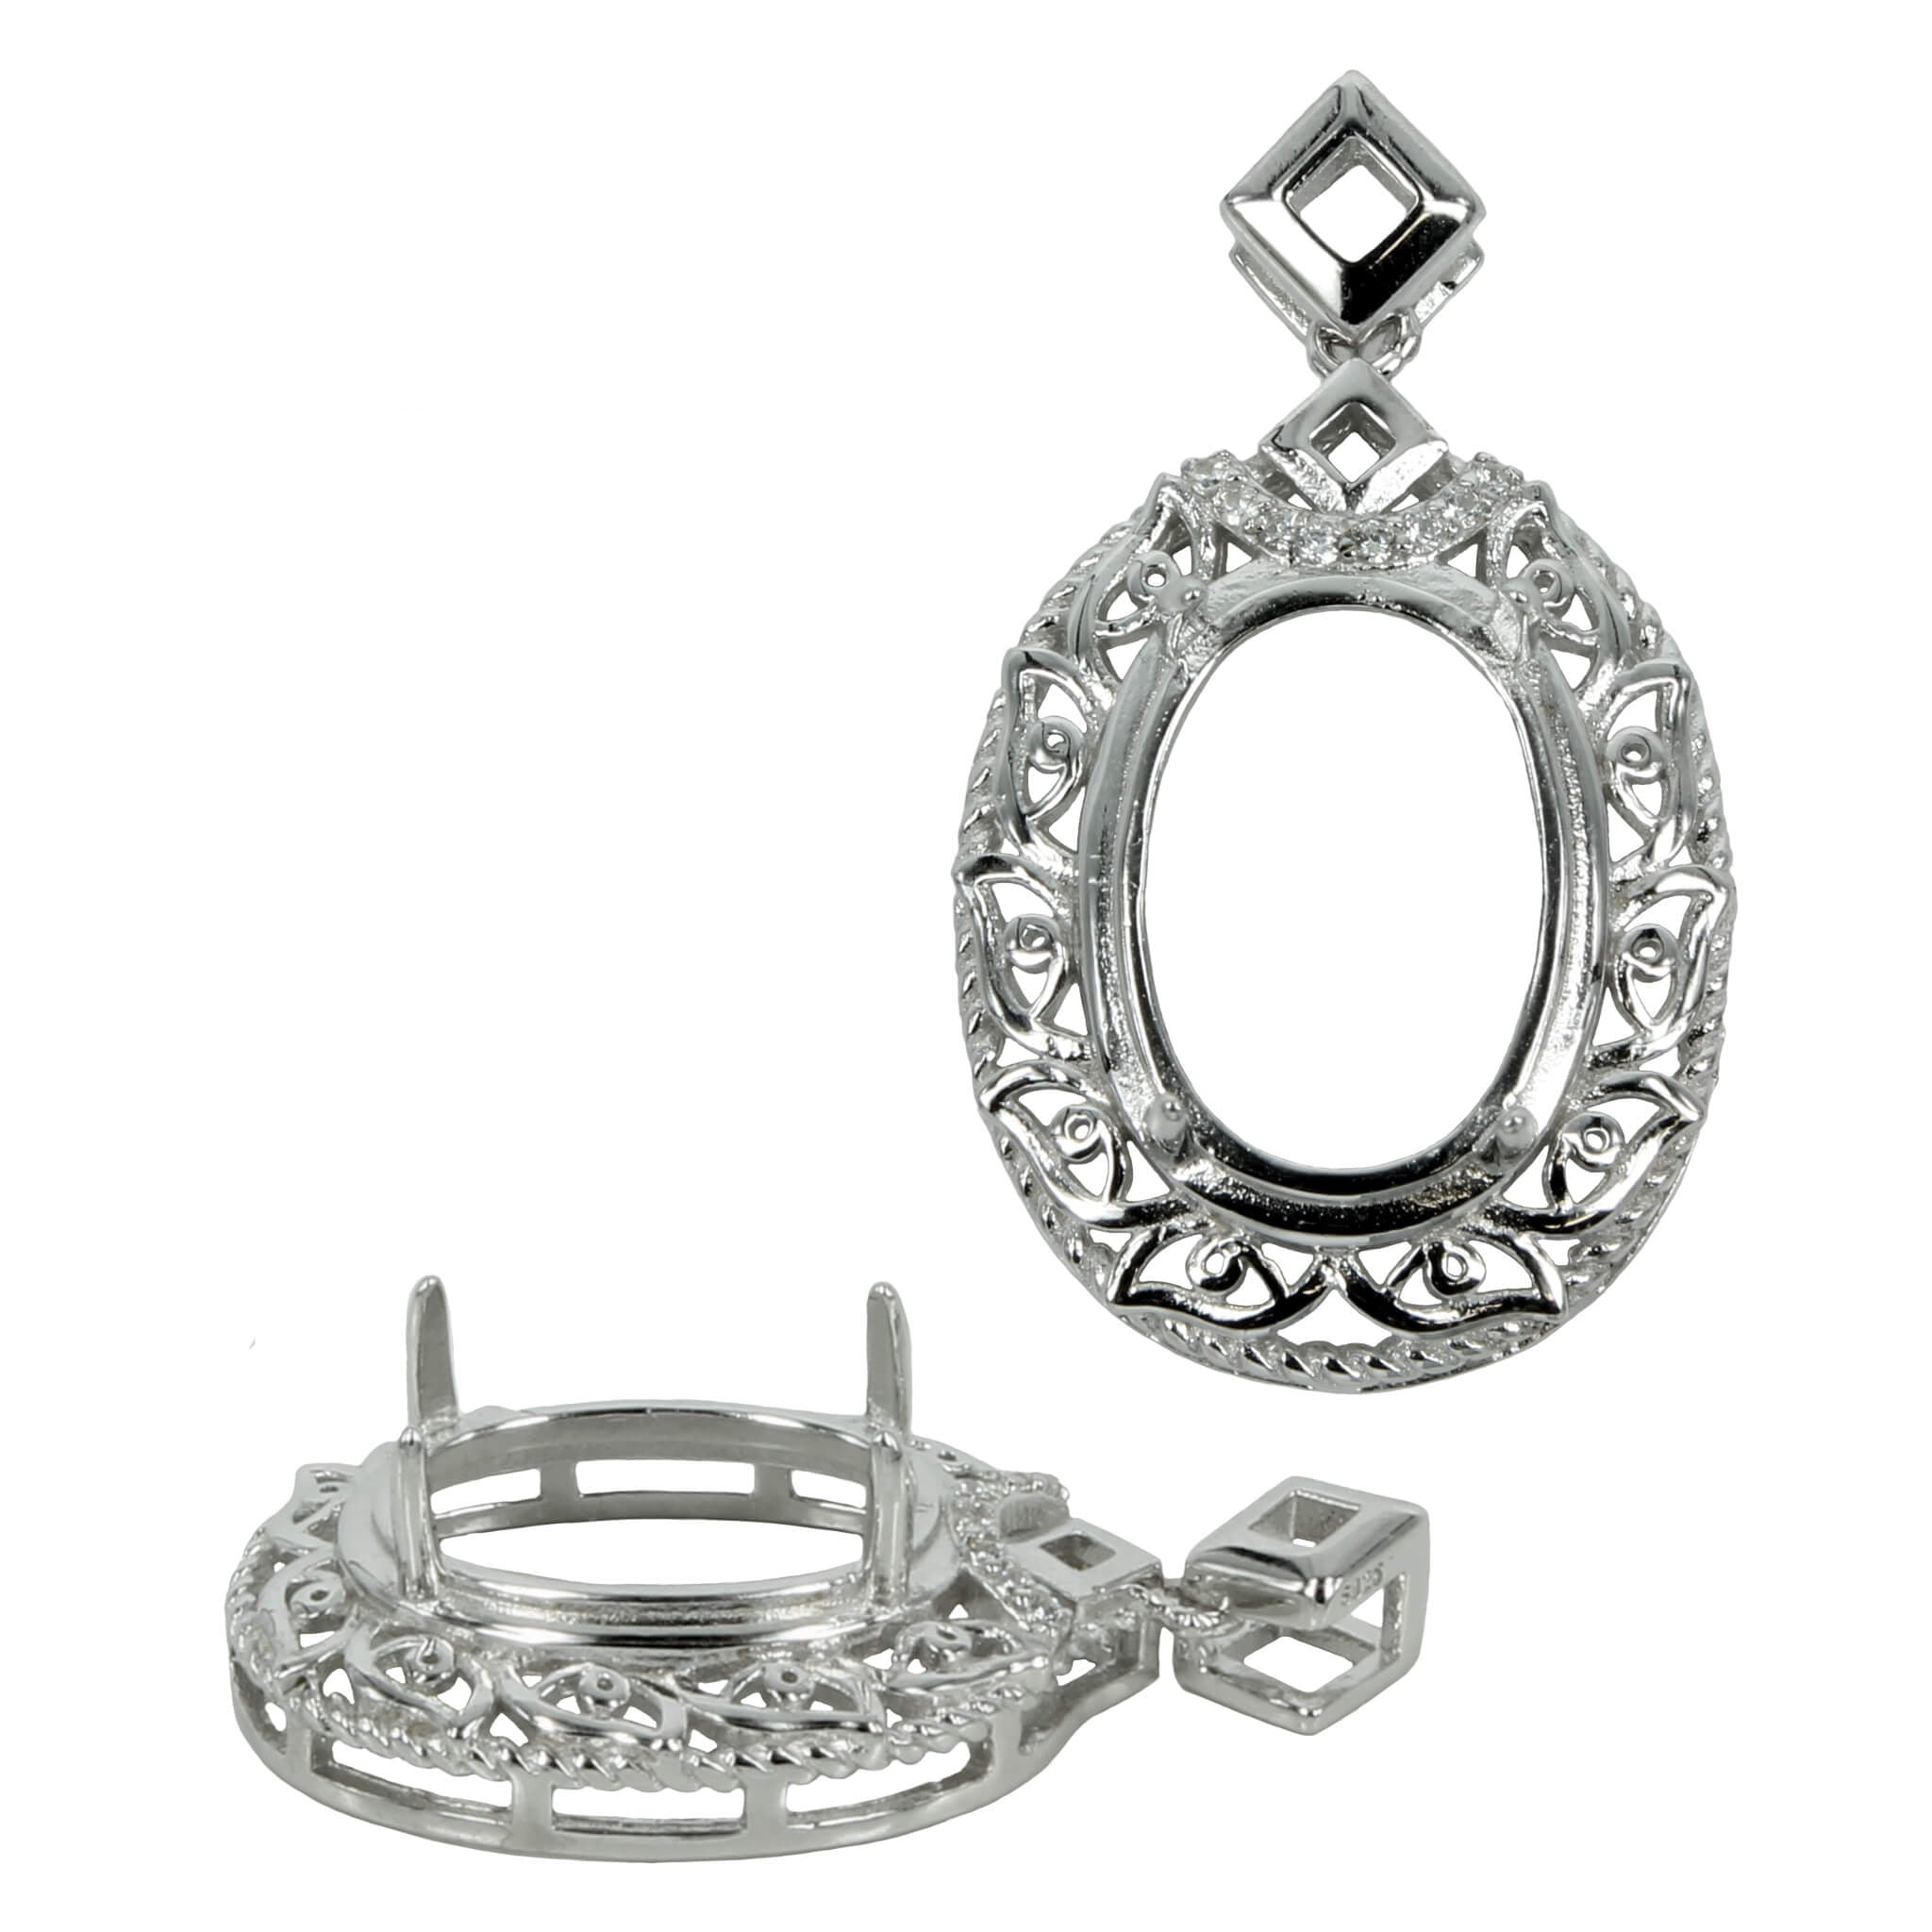 Oval Pendant with Vine Motif & CZ's Border for 10x14mm Stones in Sterling Silver